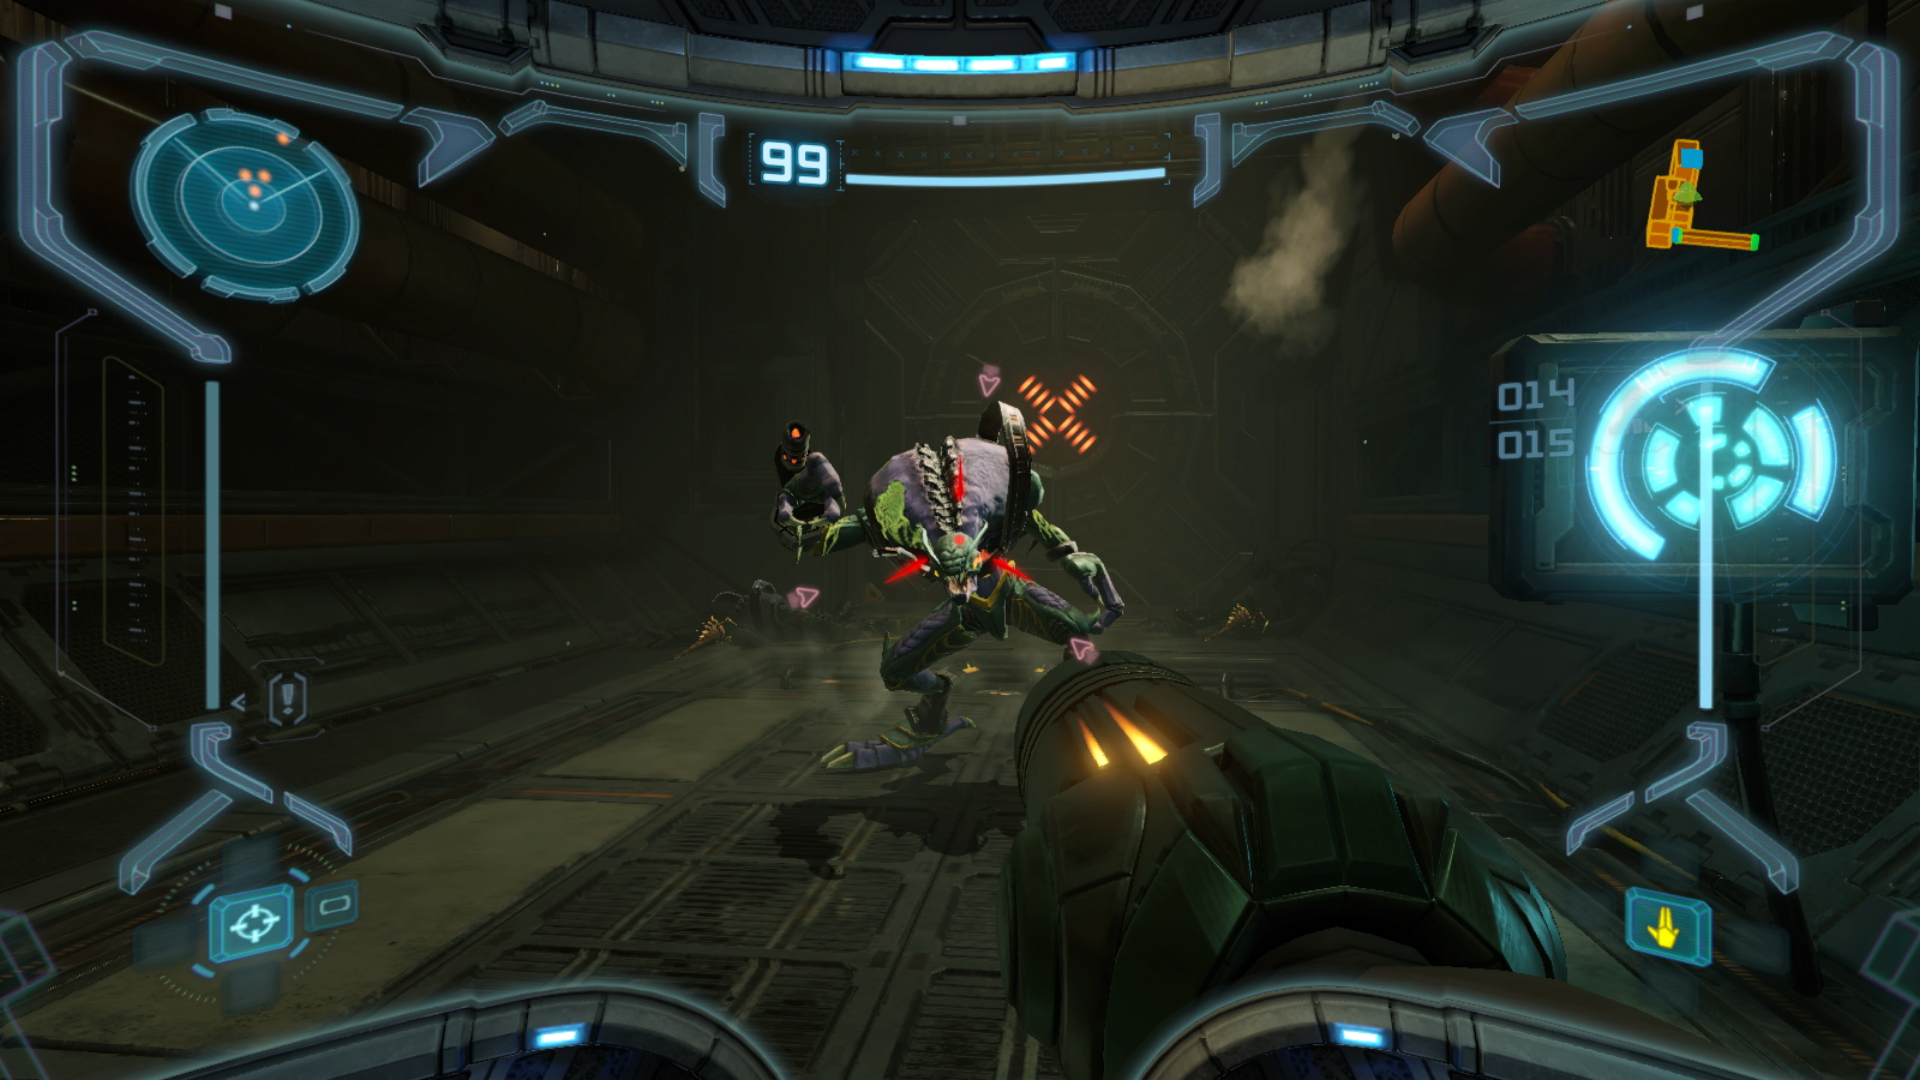 Metroid Prime Remastered screenshot, Nintendo Switch / Sorry, we don't have accessible text for this image :( / Image credit: Nintendo